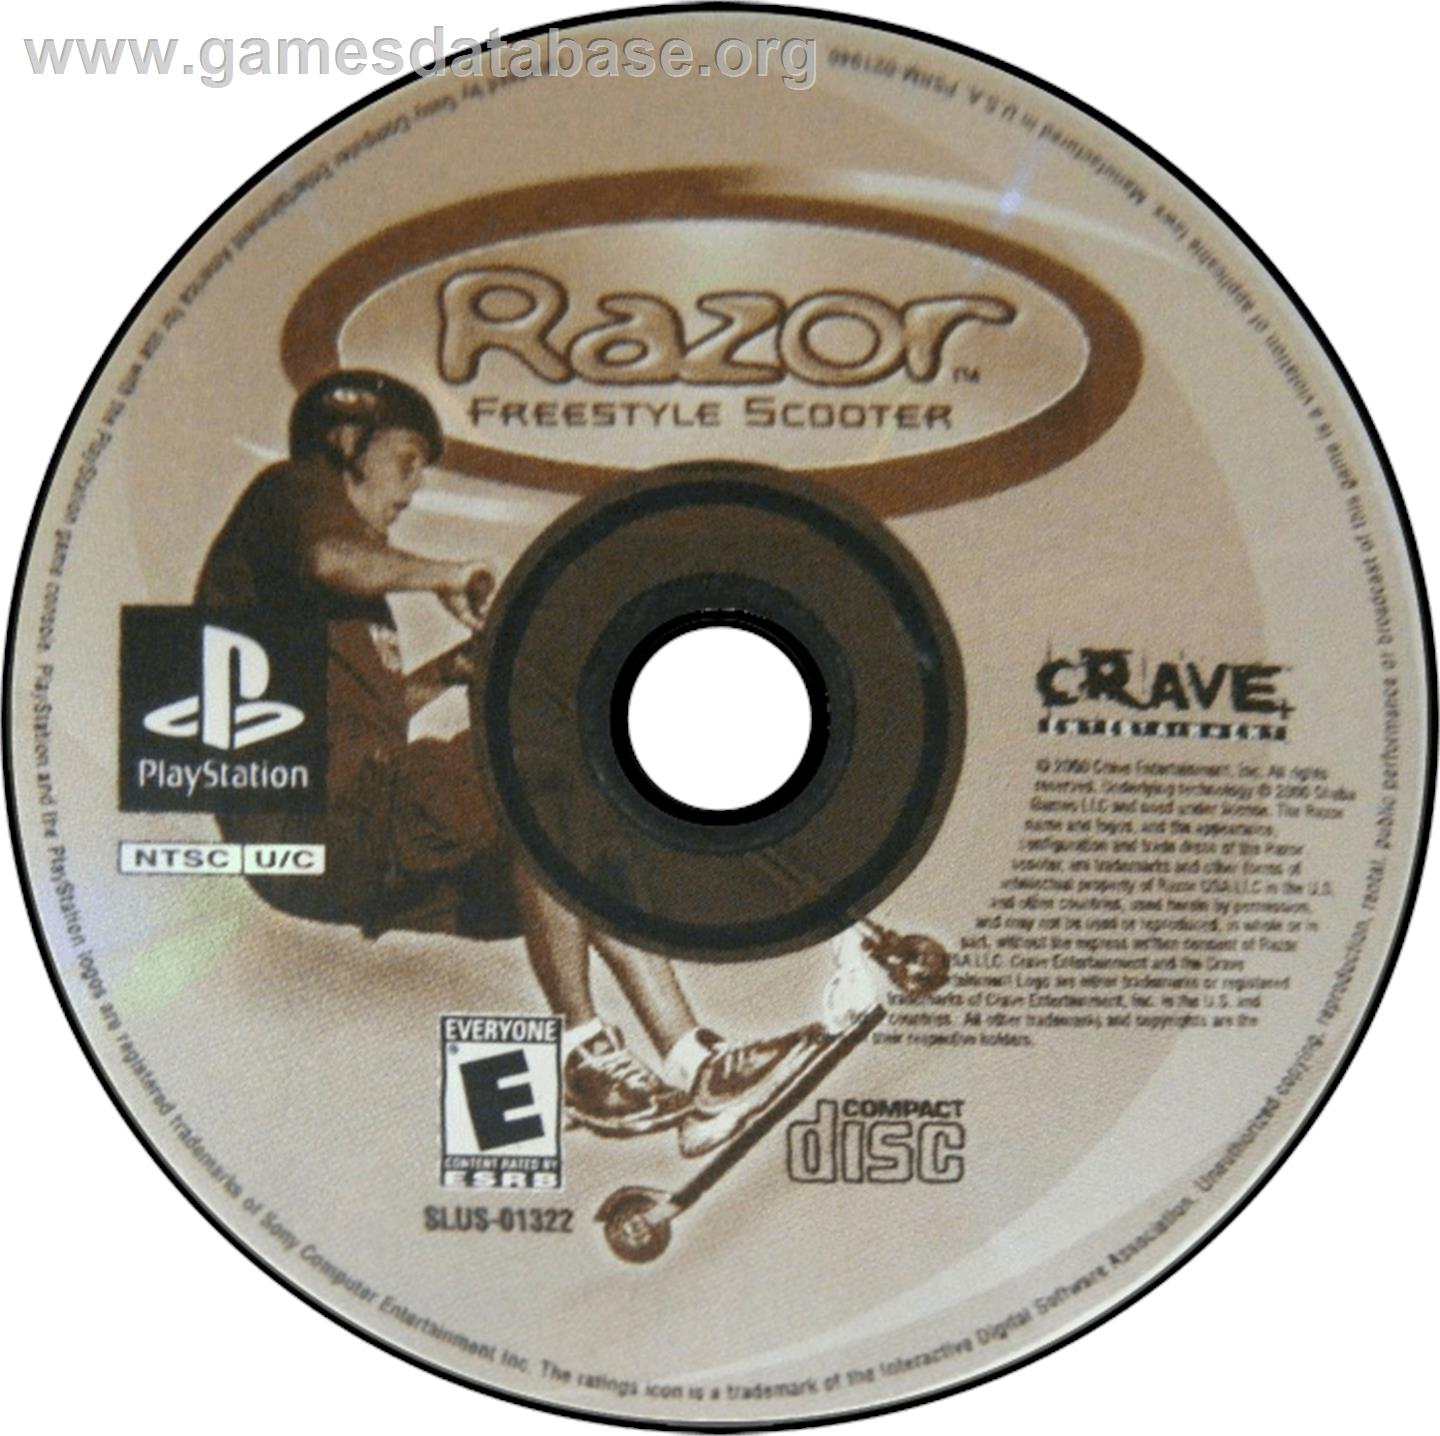 Razor Freestyle Scooter - Sony Playstation - Artwork - Disc